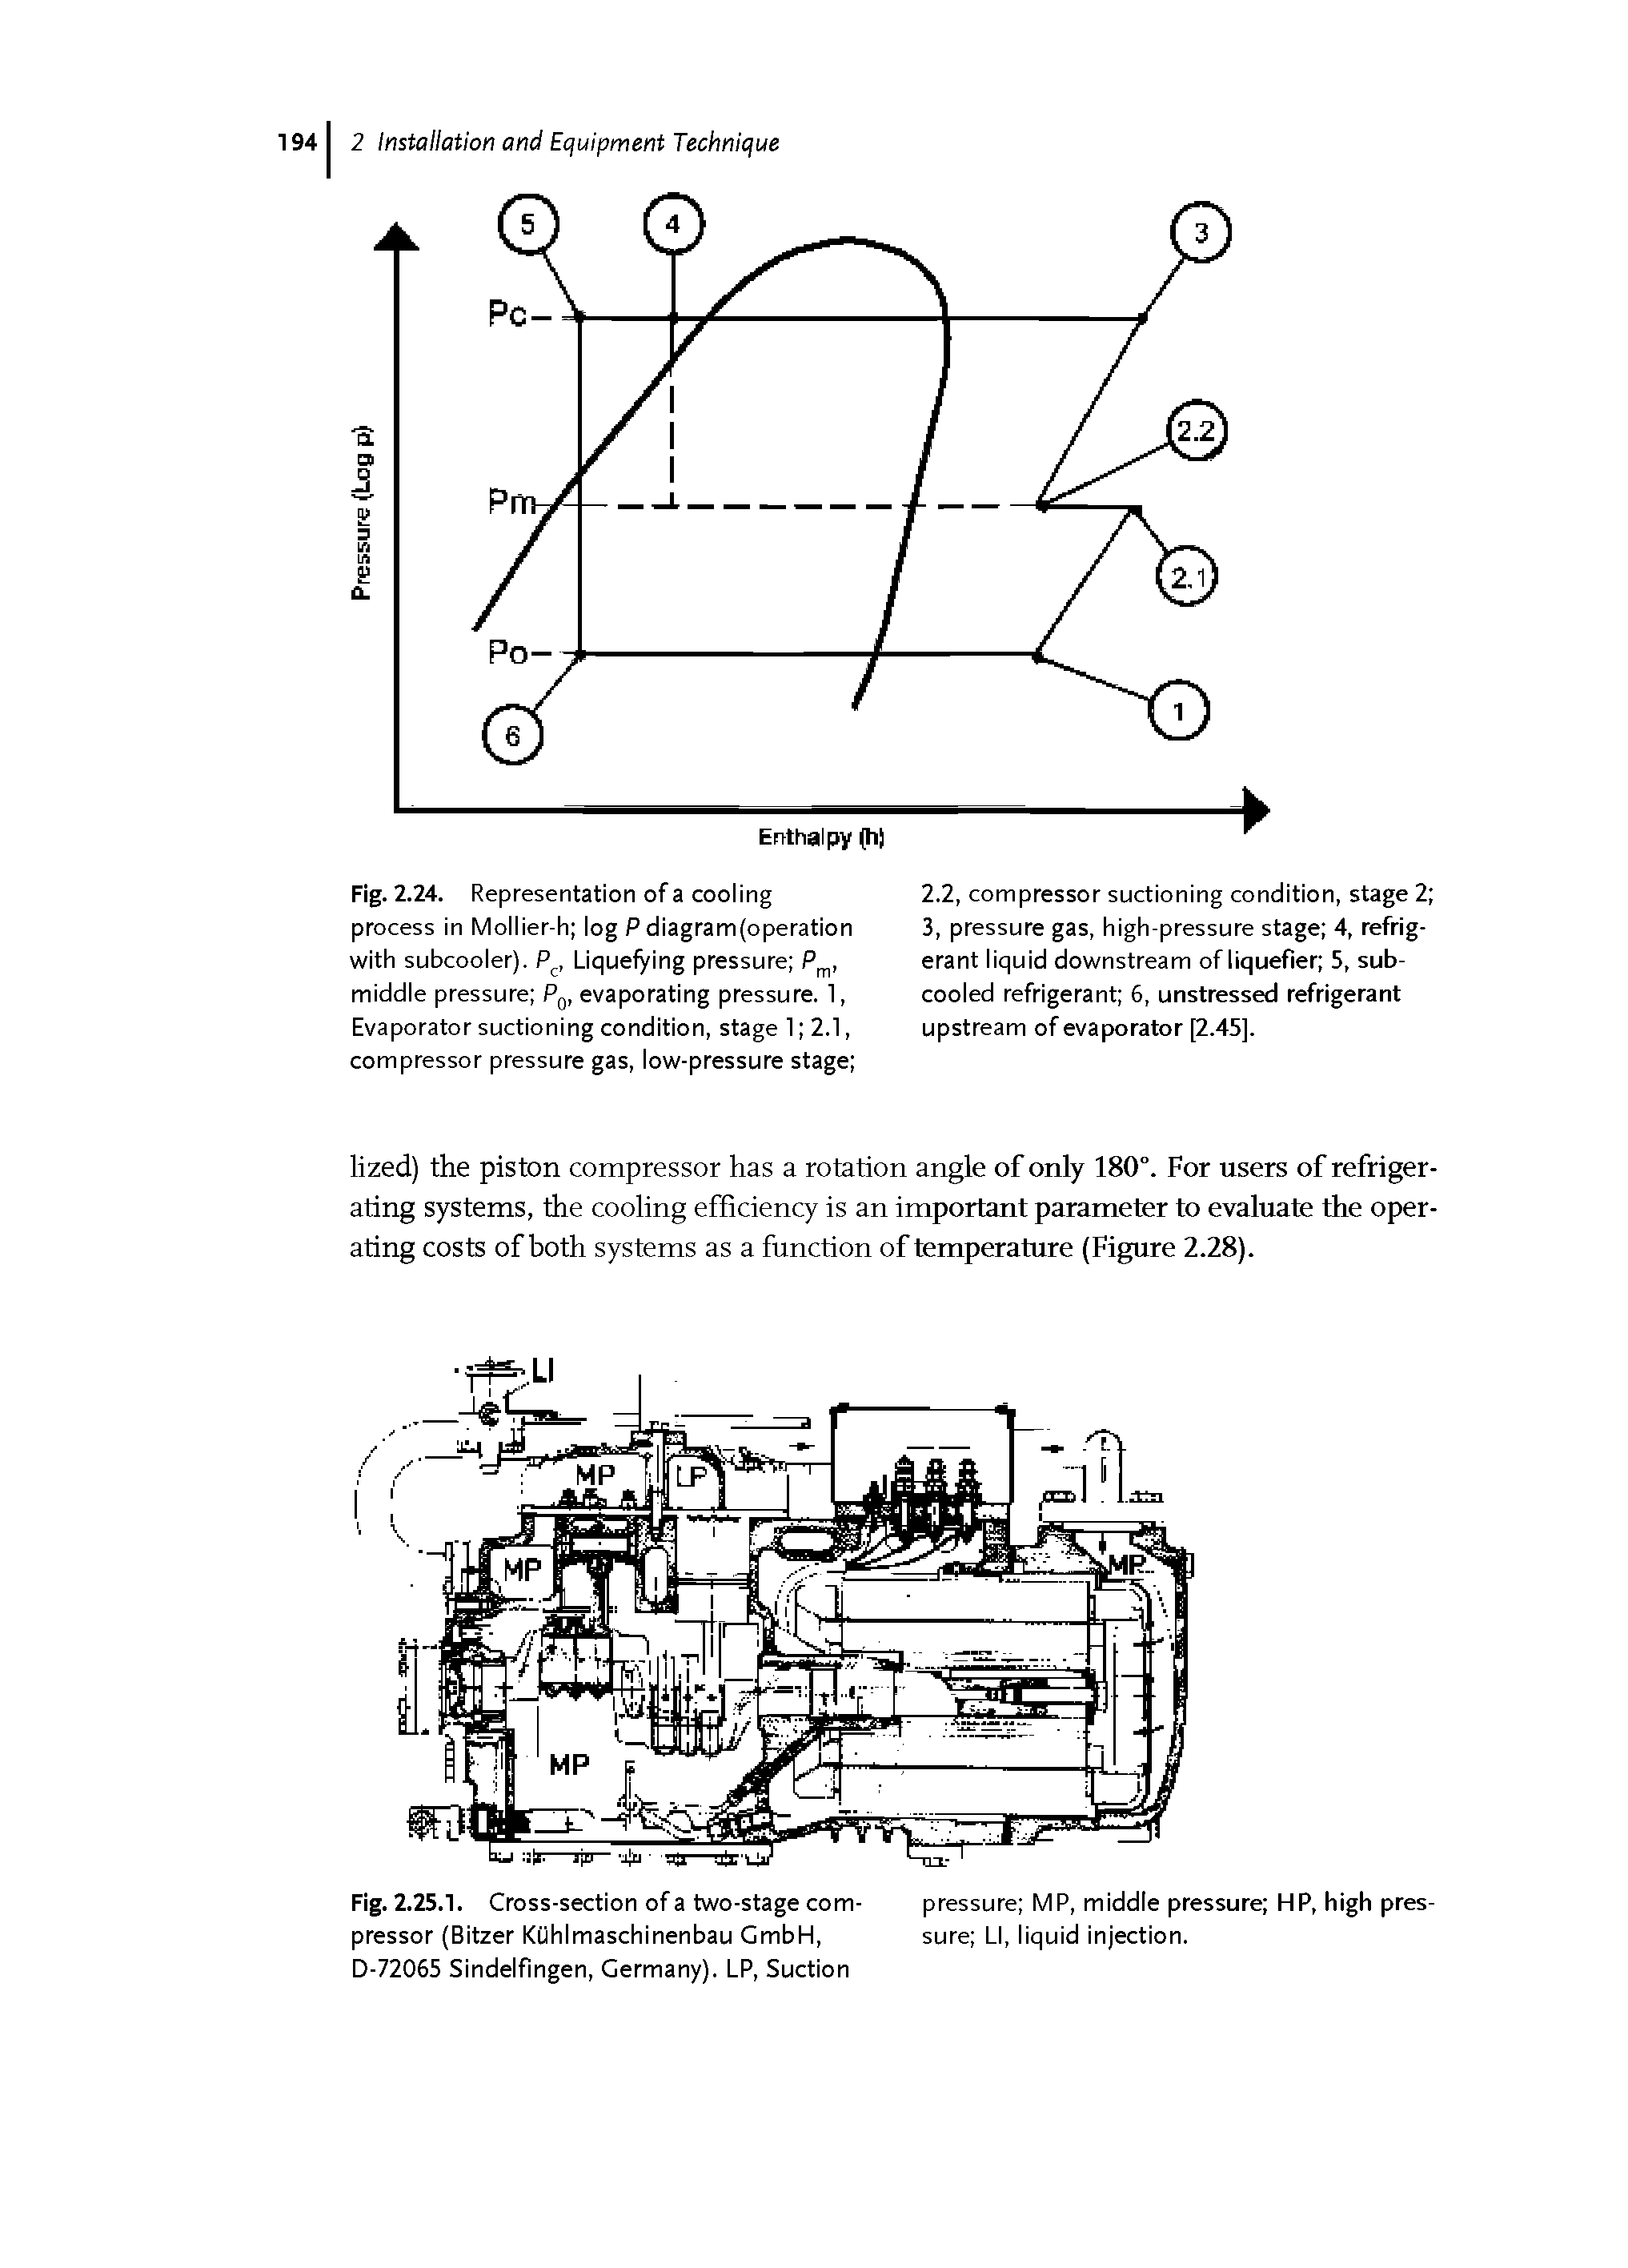 Fig. 2.24. Representation of a cooling process in Mollier-h log P diagram(operation with subcooler). Pc, Liquefying pressure P, middle pressure P0, evaporating pressure. 1, Evaporator suctioning condition, stage 1 2.1, compressor pressure gas, low-pressure stage ...